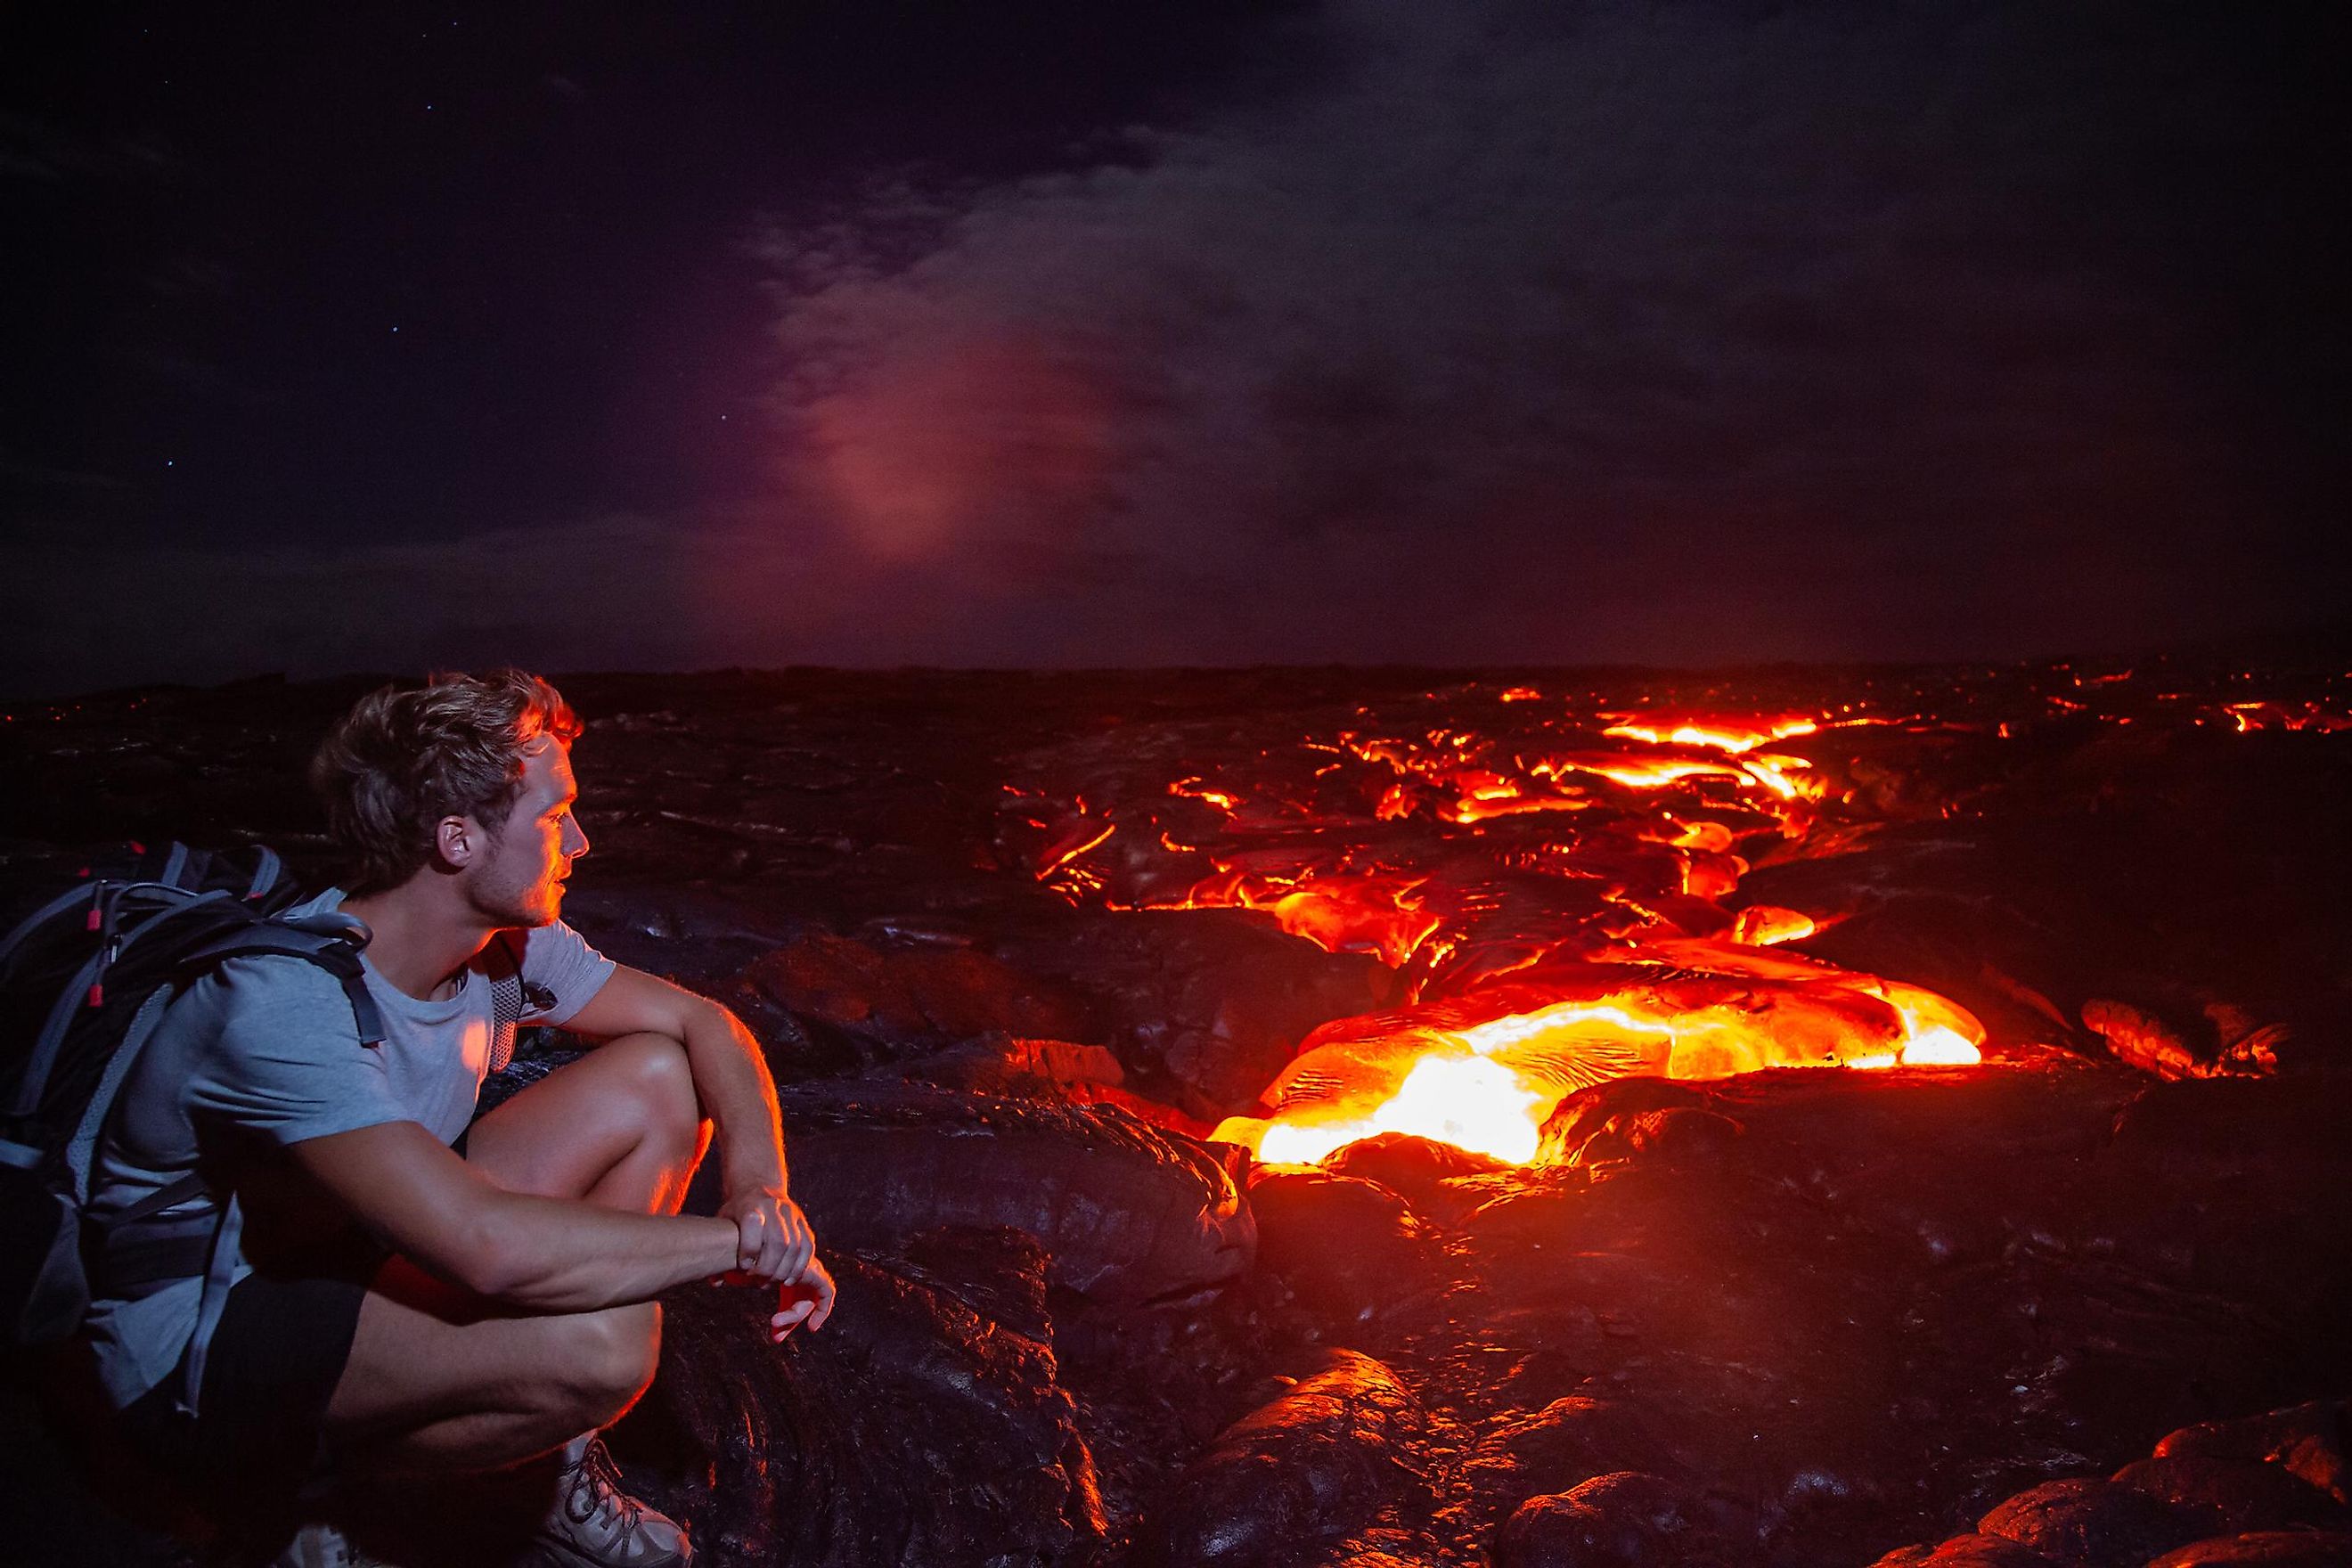 Tourist admiring the spectacular view of a volcano at the Hawaii Volcanoes National Park.